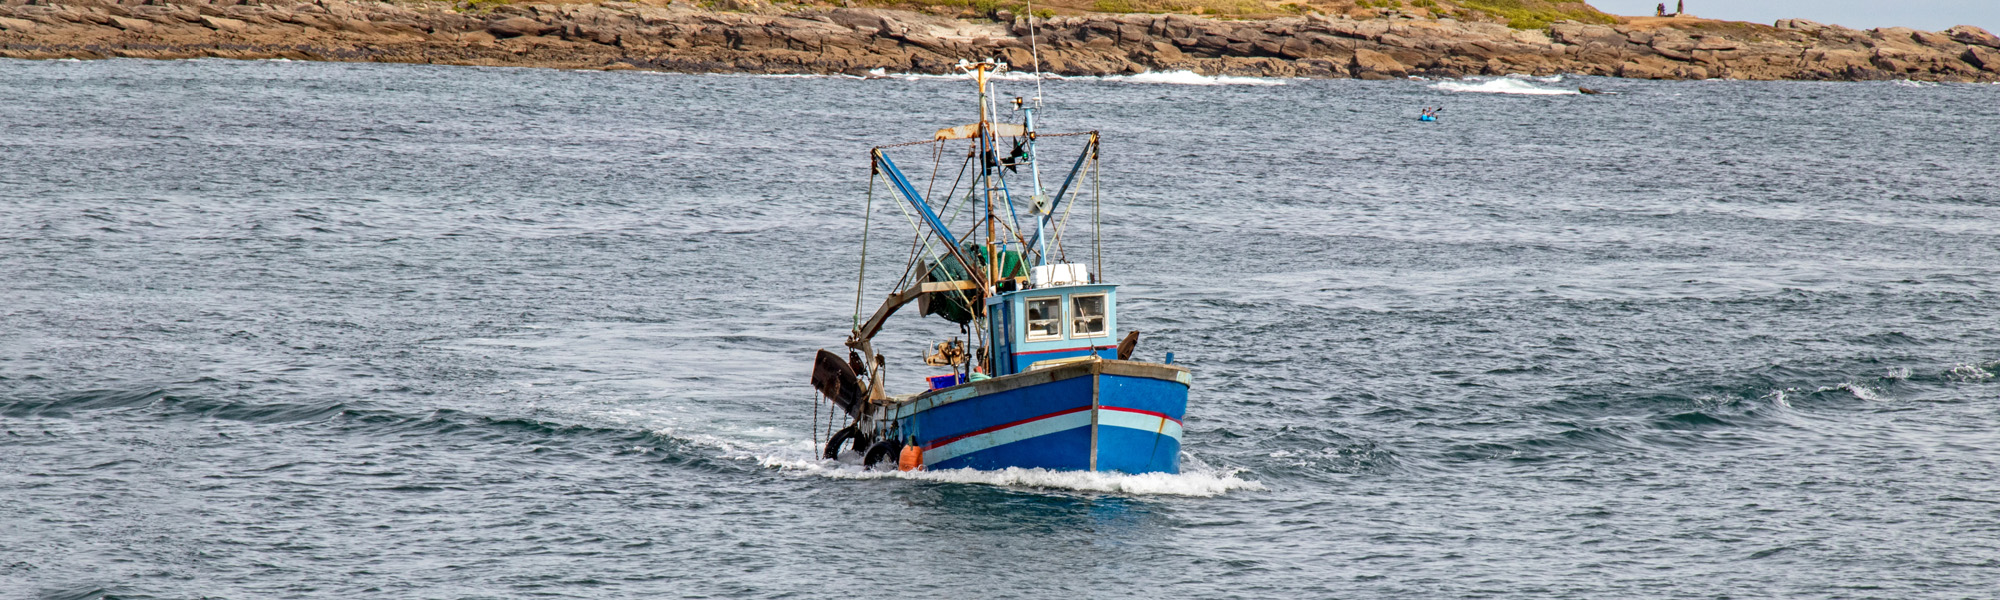 trawler off into an inlet